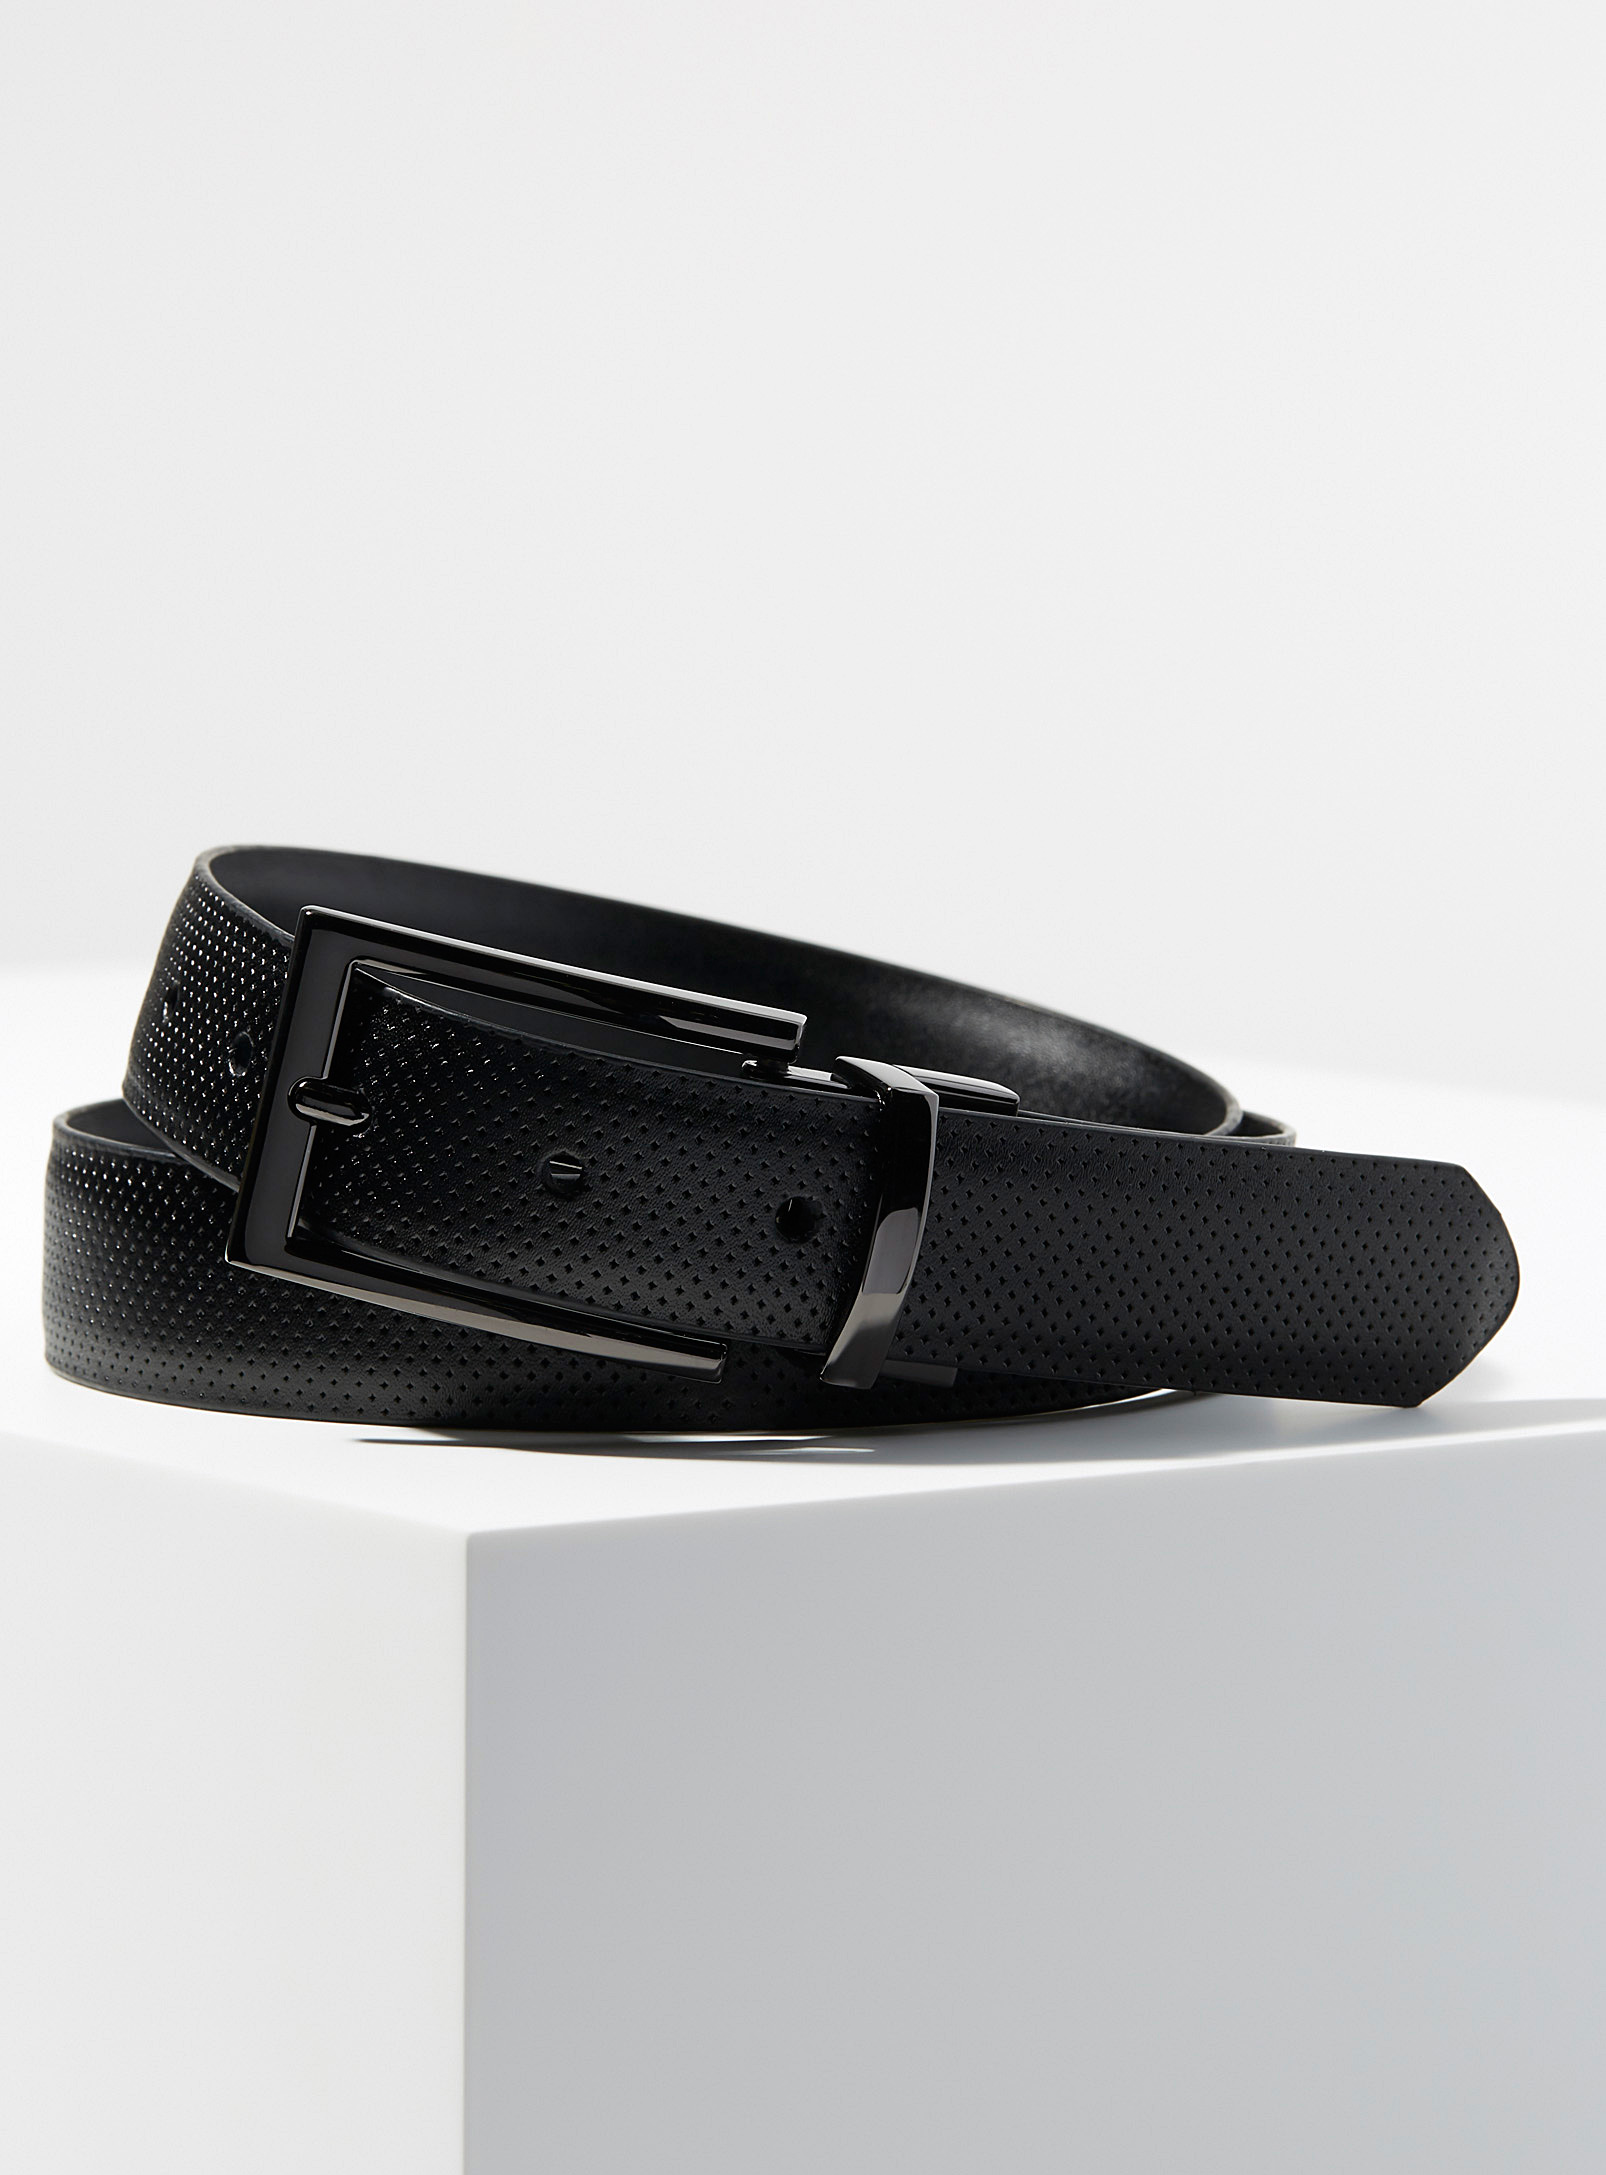 Le 31 - Men's Reversible perforated leather belt